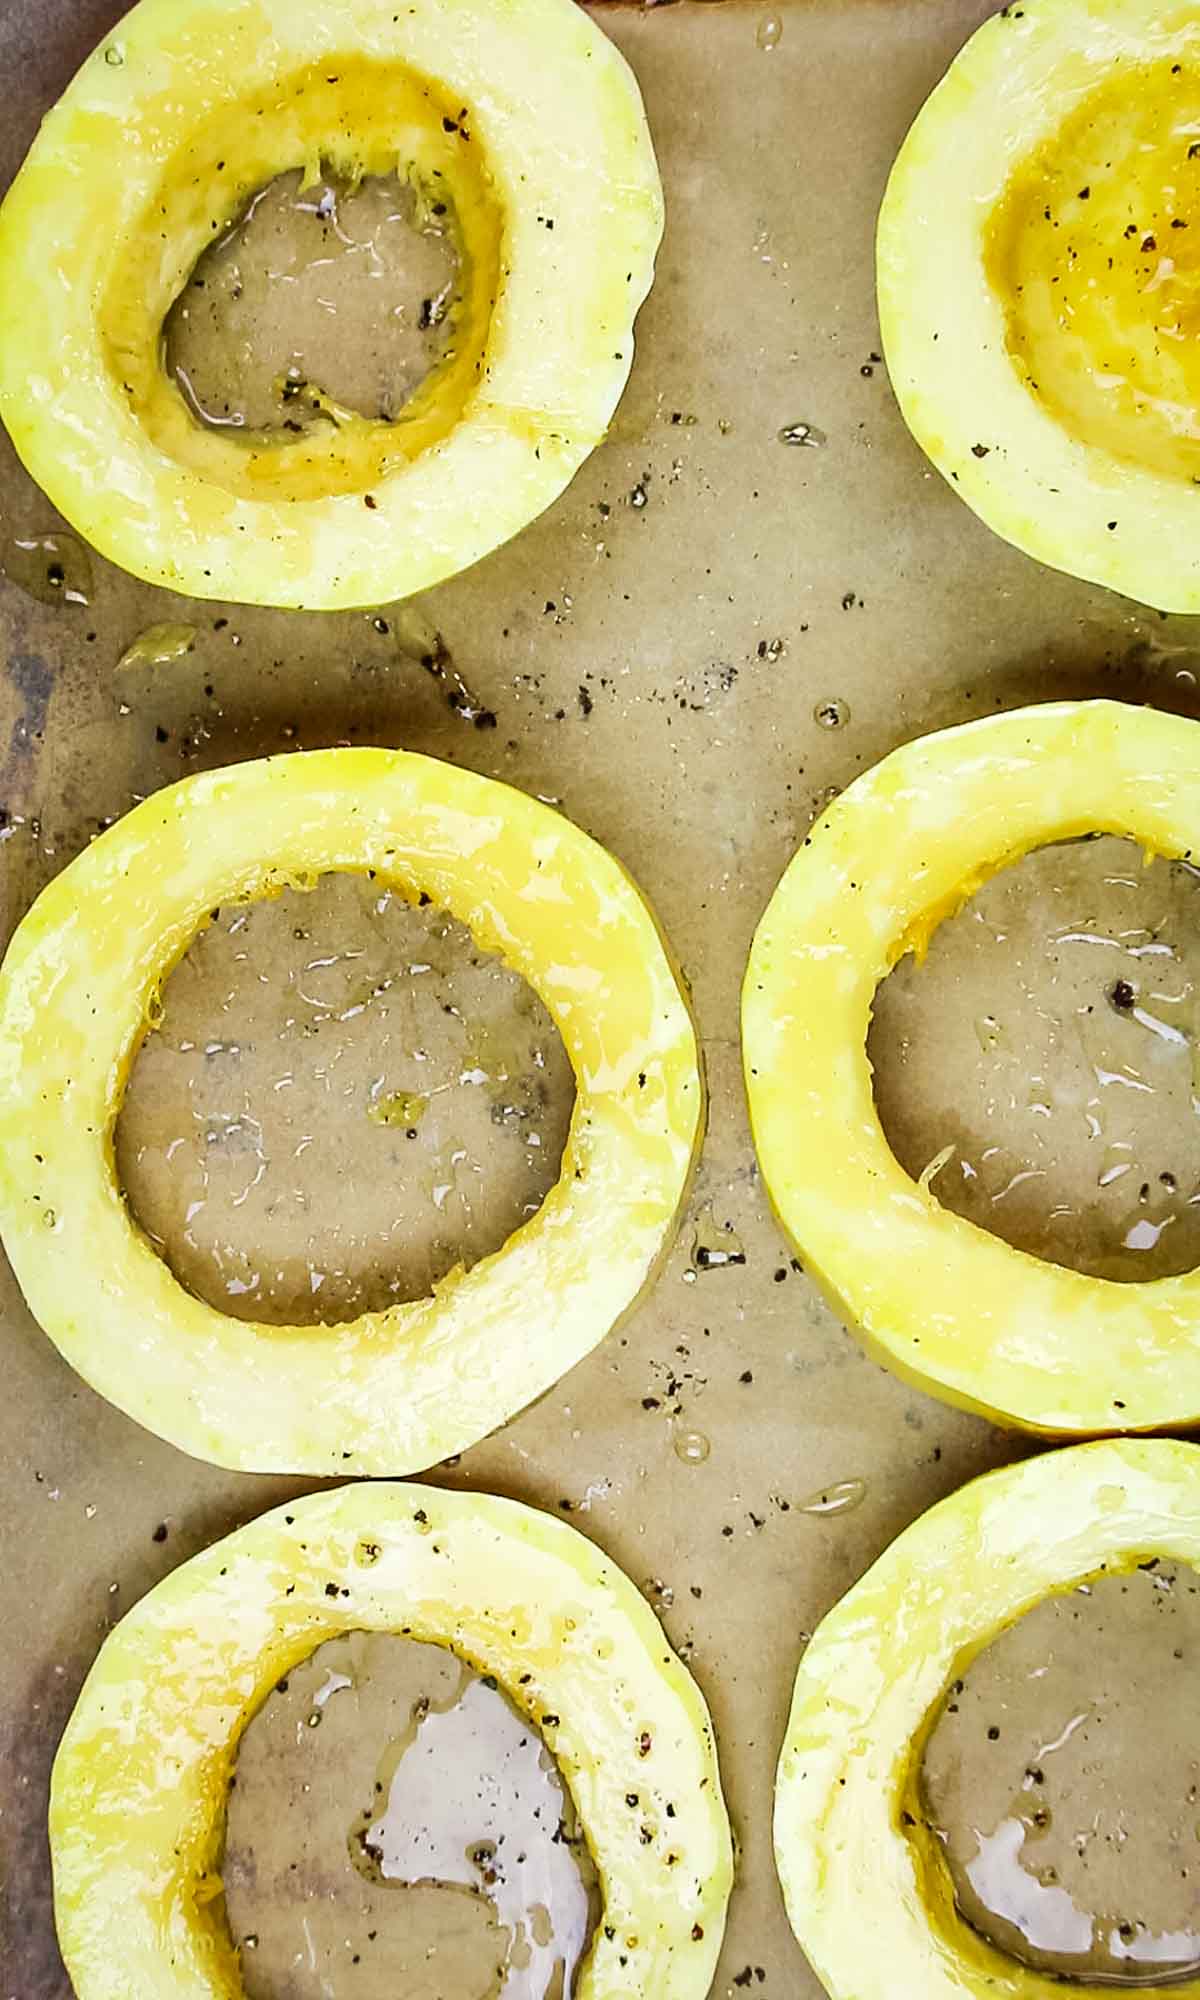 spaghetti squash rings seasoned with oil and salt and pepper.